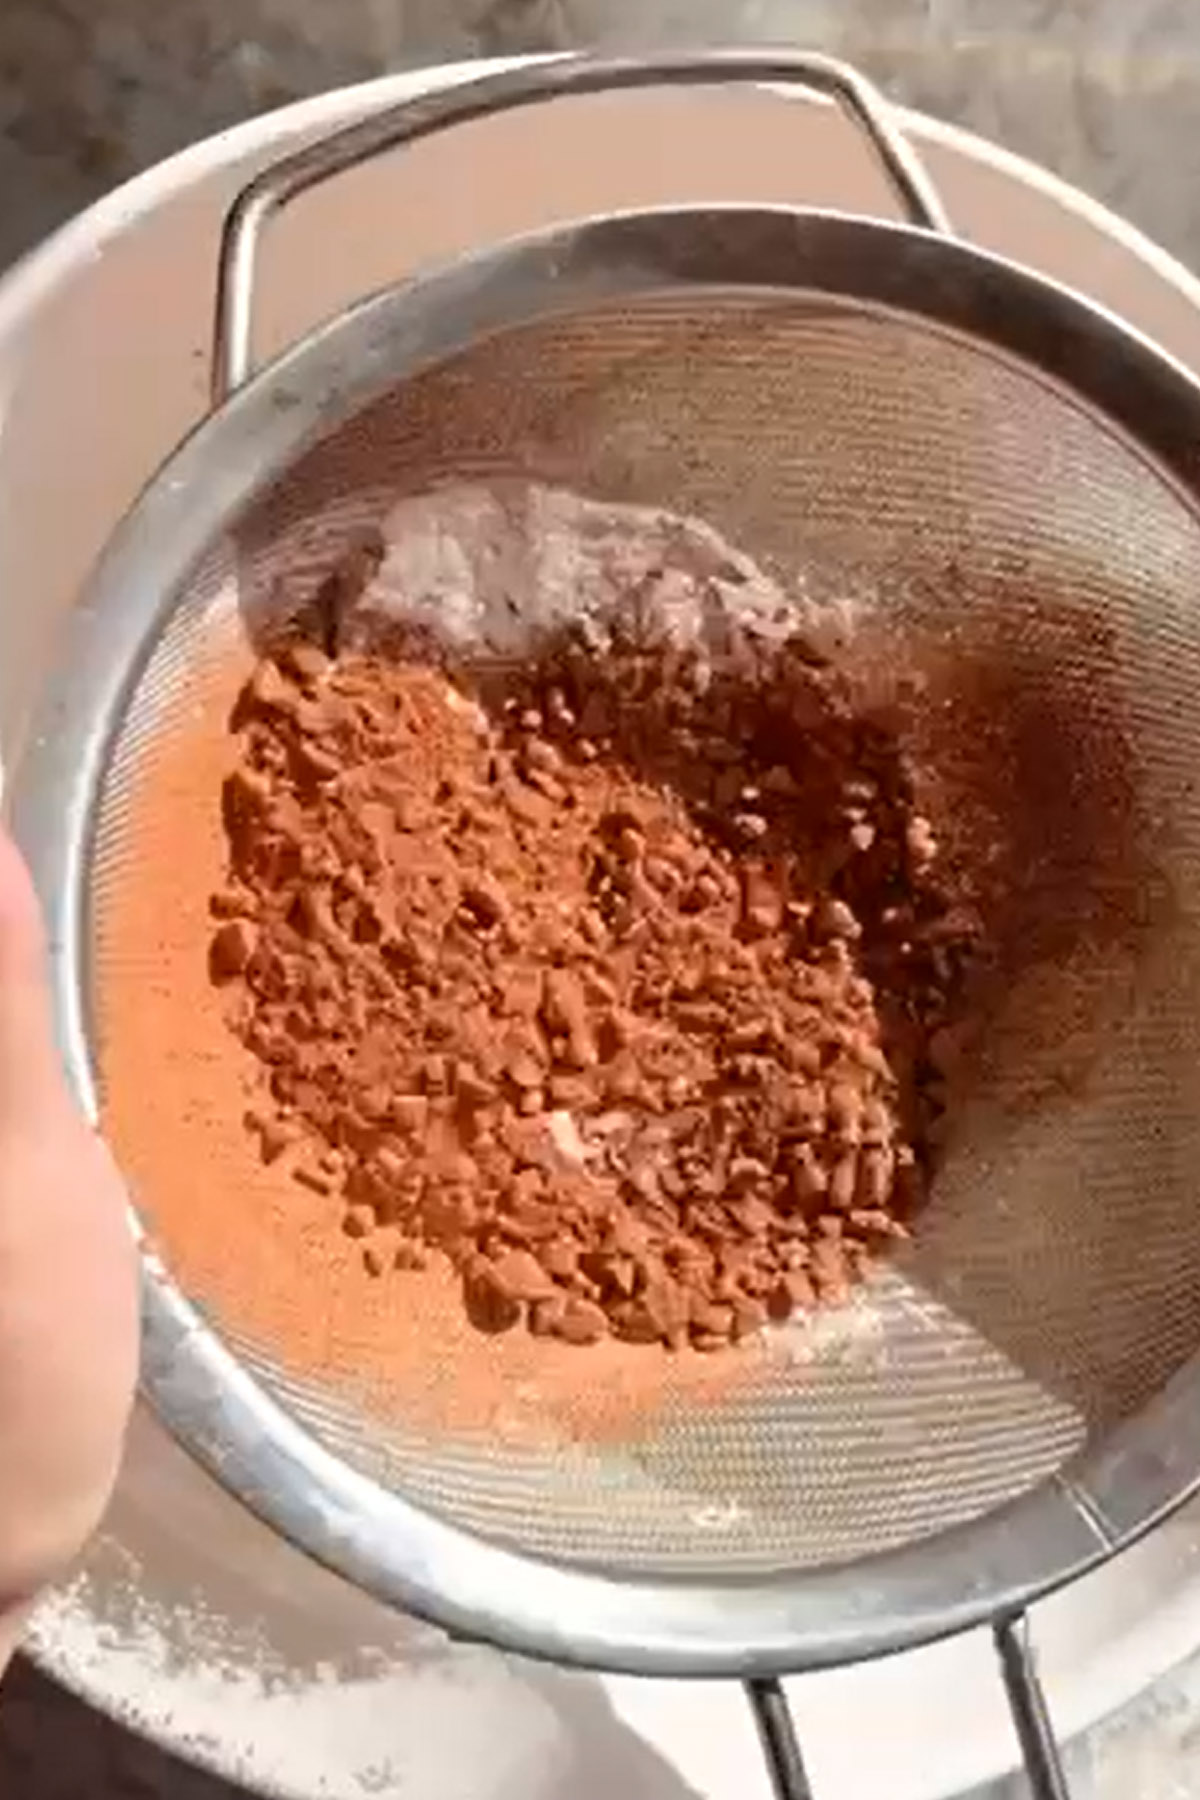 Cocoa powder is sifted in a bowl.